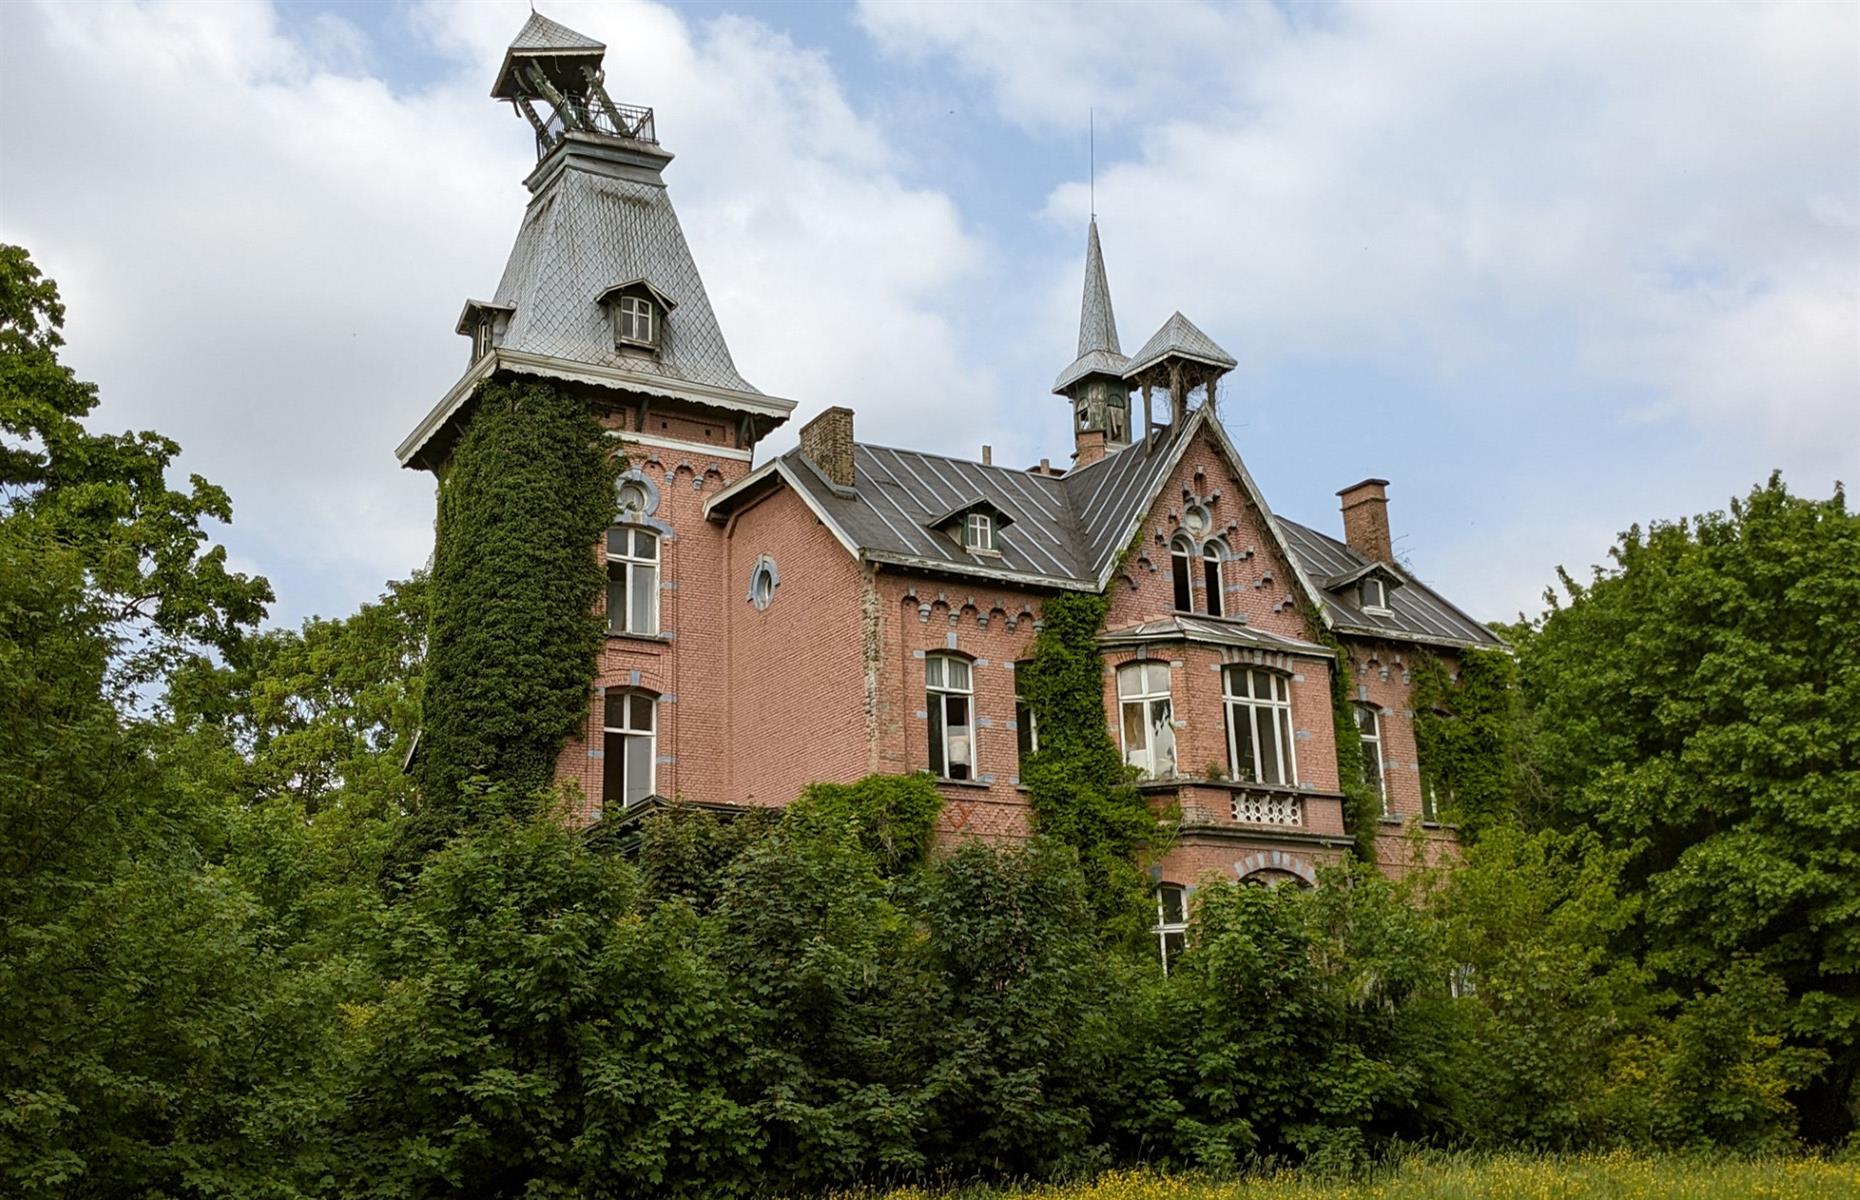 <p>This eccentric-looking pink château nestled in the remote Belgium countryside hides a tragic past. Discovered by urban explorer and photographer <a href="https://www.instagram.com/st.severus/?hl=en">Bryan Sansivero</a>, this unusual property was once the home of a famous French artist, whose hand-painted work still covers much of the walls and ceilings.</p>